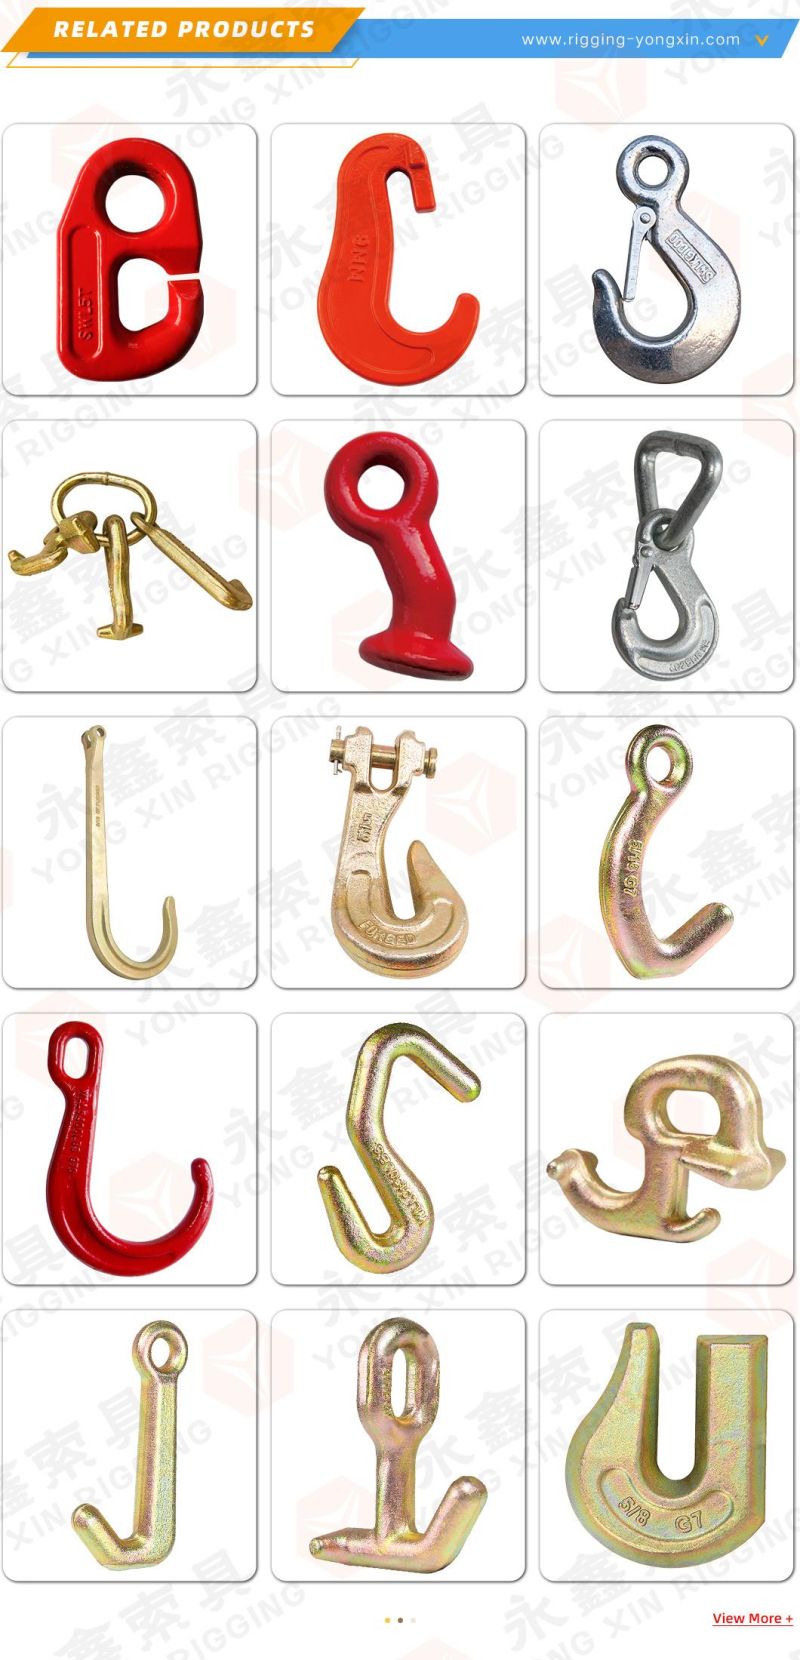 G70 5/16′′ Rtj Hooks Forged V Towing Chains Bridle Hooks